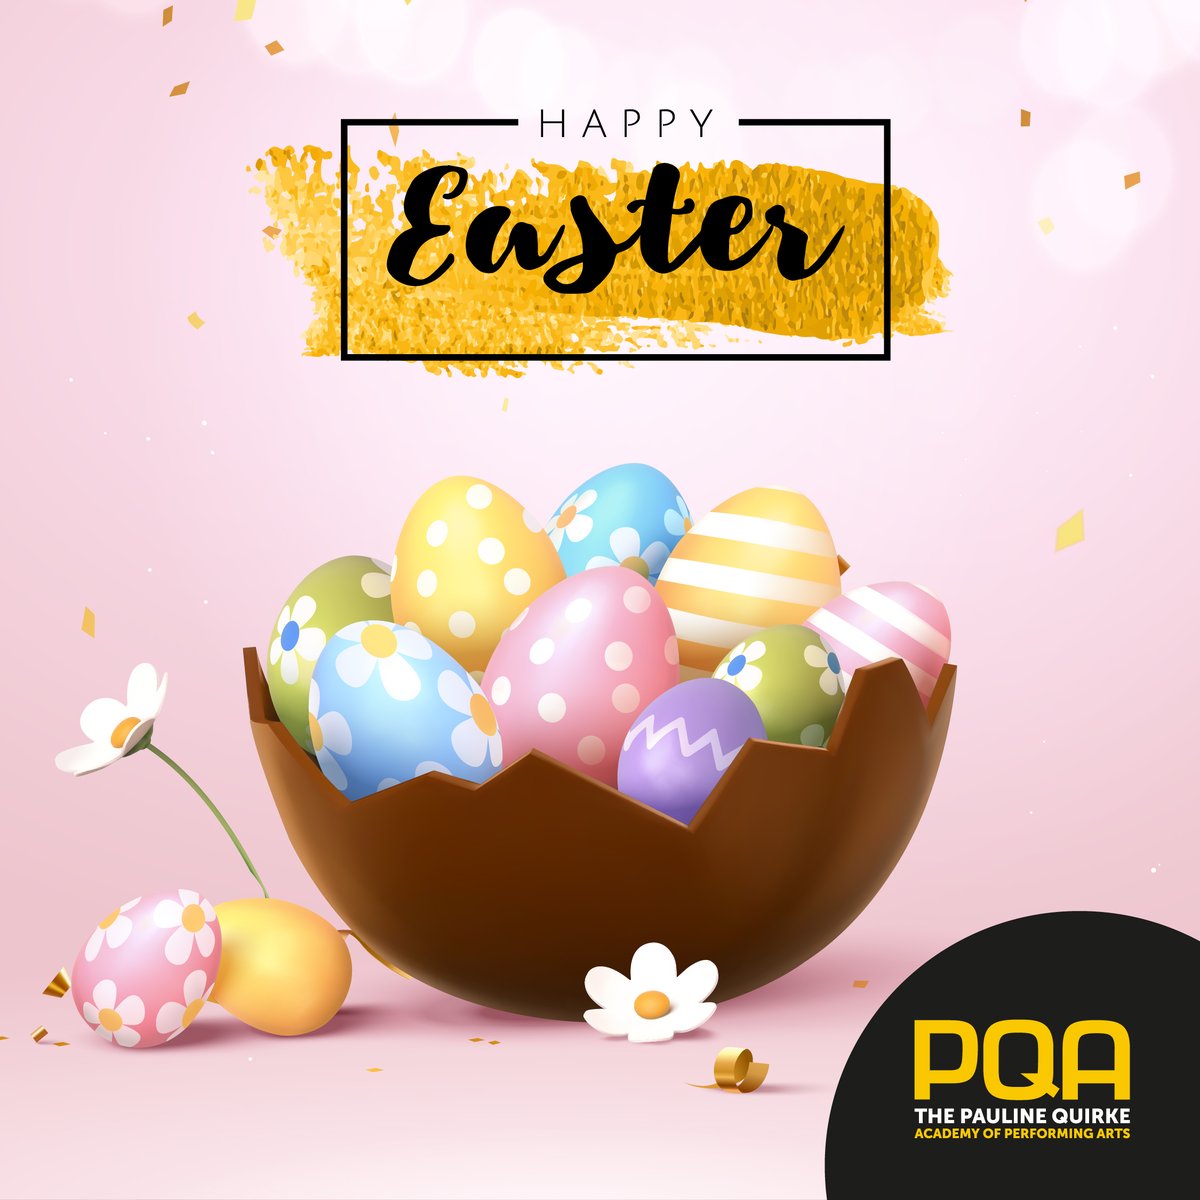 🐣🌸 HAPPY EASTER! 🌸🐣 Wishing you all a very ✨egg-ceptional✨ weekend with all the Easter eggs your heart desires! 💛 #Easter